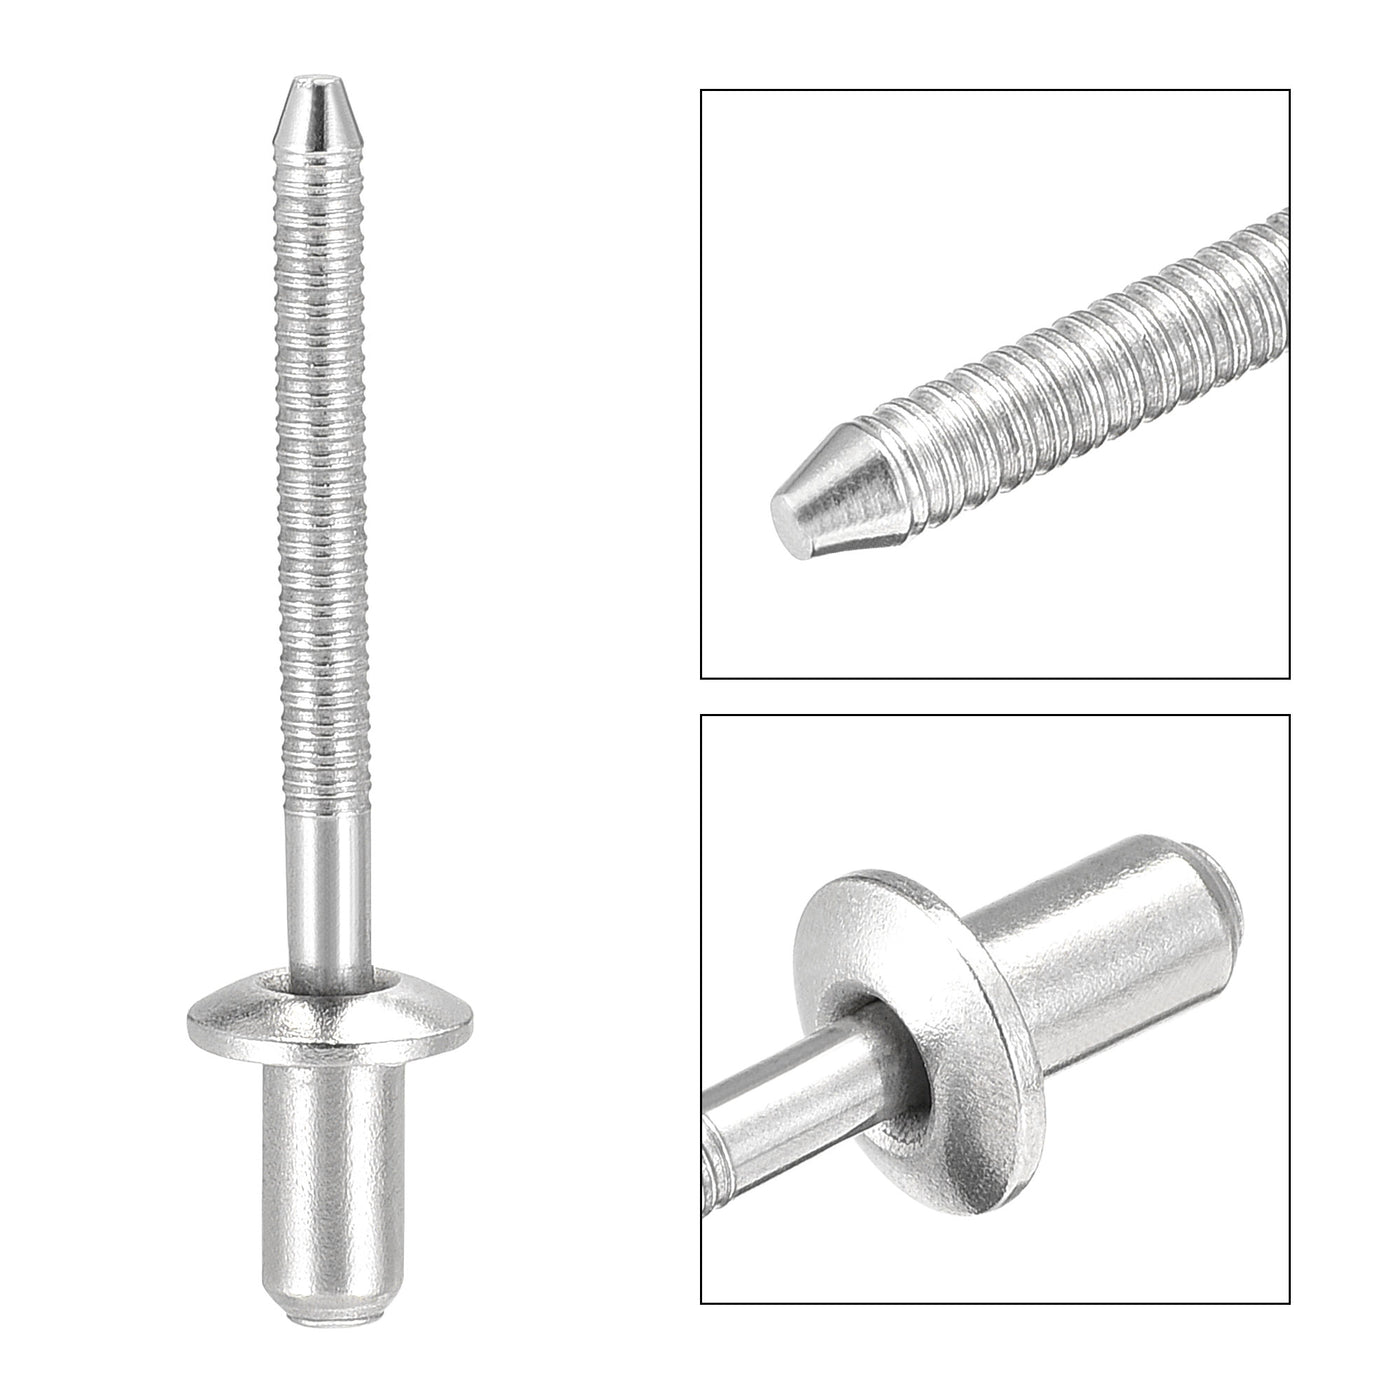 uxcell Uxcell Blind Rivets 304 Stainless Steel 4.8mm Diameter 9mm Grip Length 100pcs